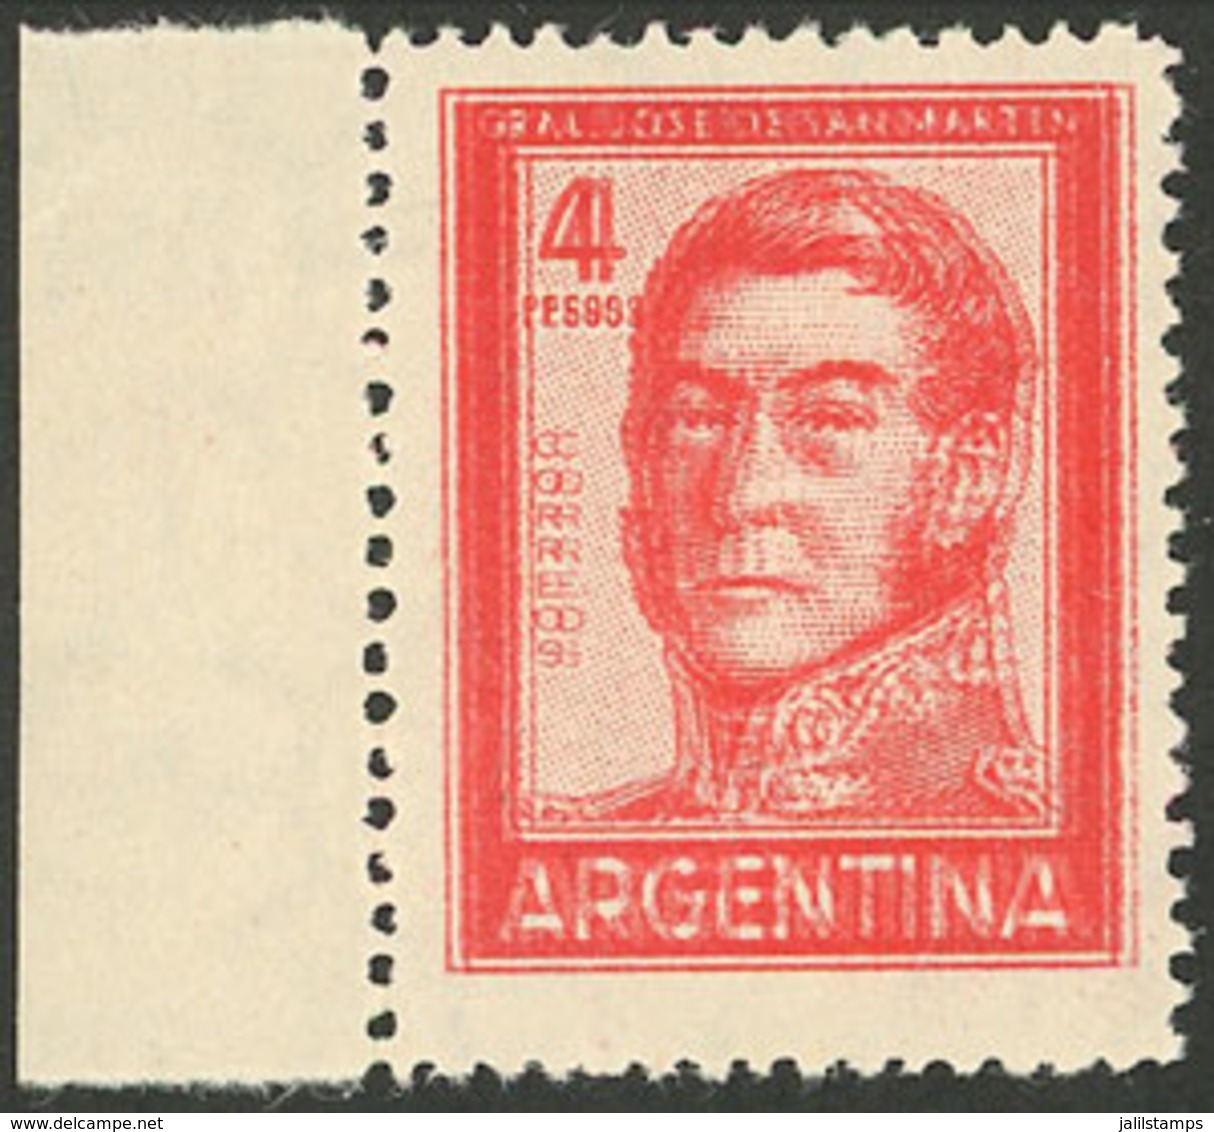 ARGENTINA: GJ.1138a, Spectacular COMPLETE DOUBLE IMPRESSION, Superb And Rare! - Unused Stamps